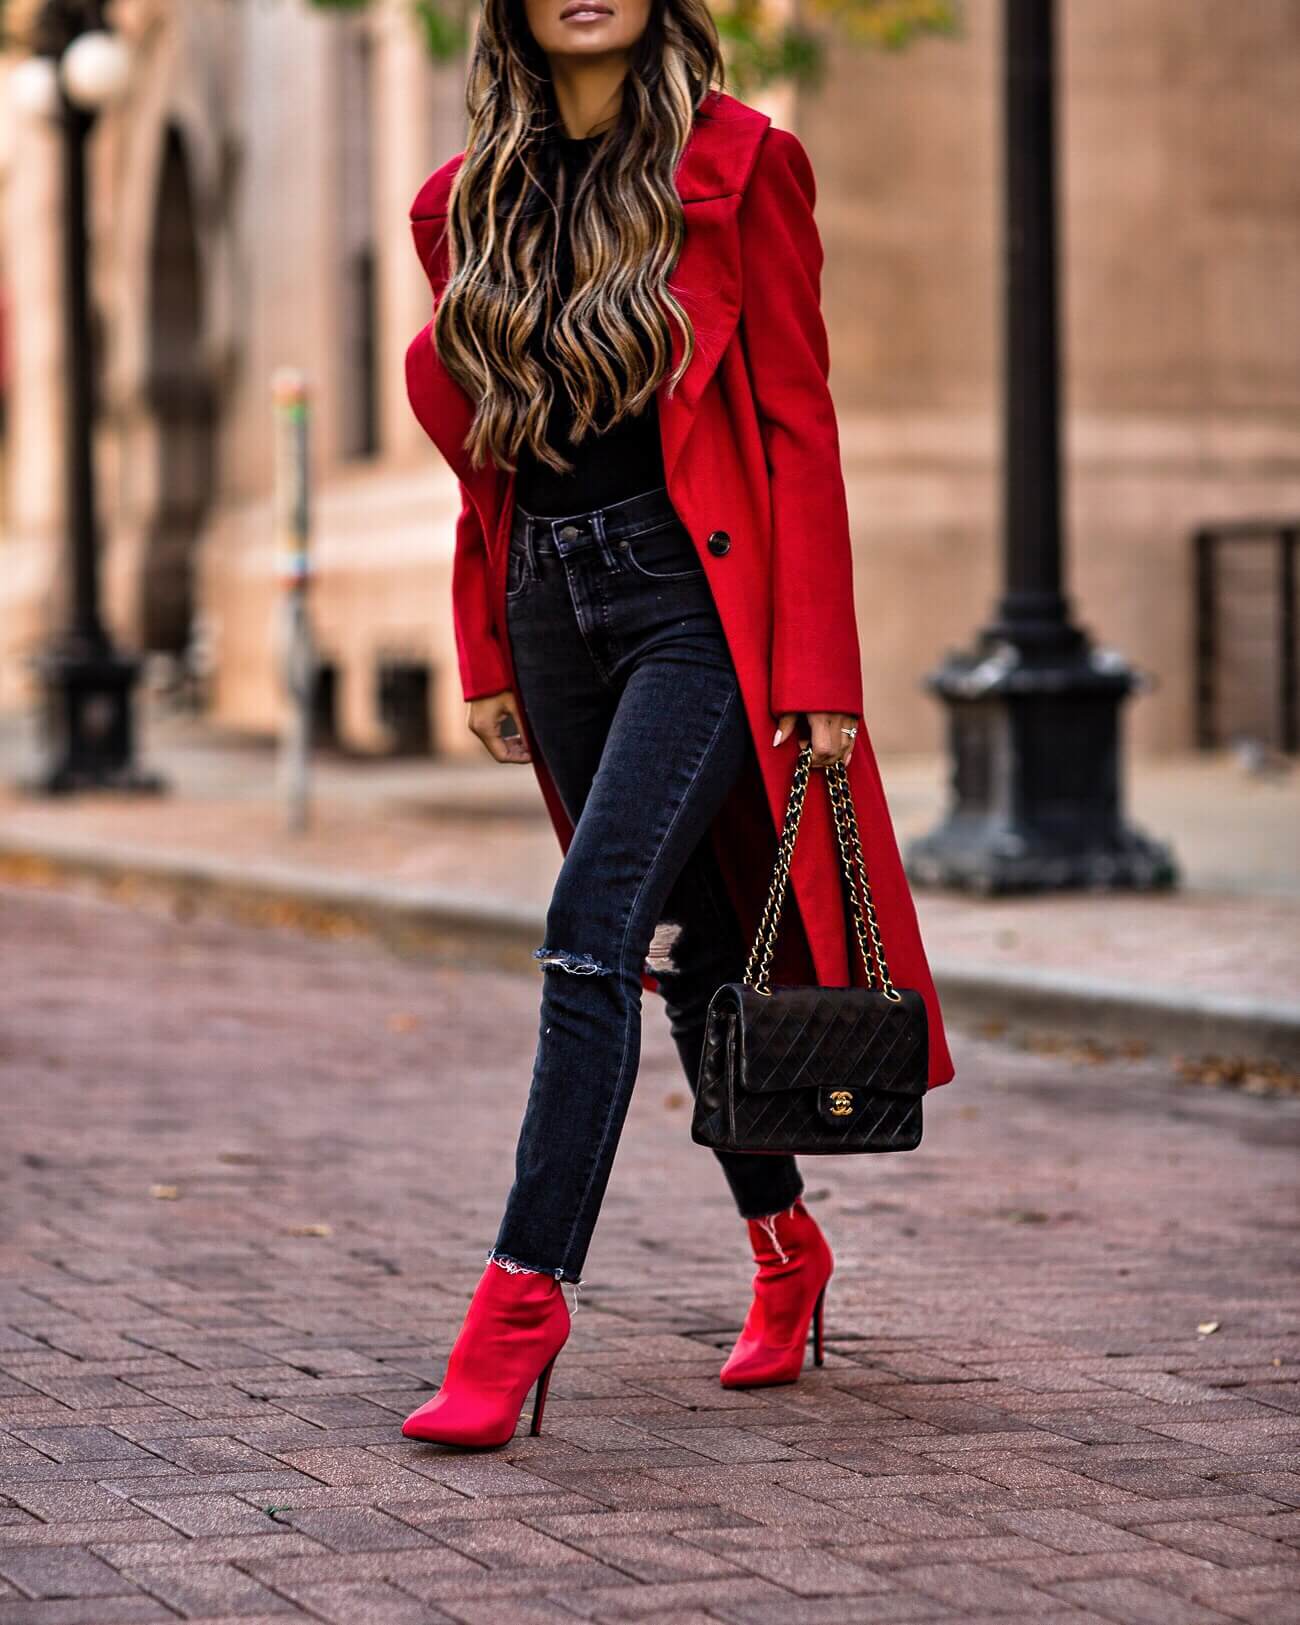 mia mia mine wearing red statement booties from steve madden